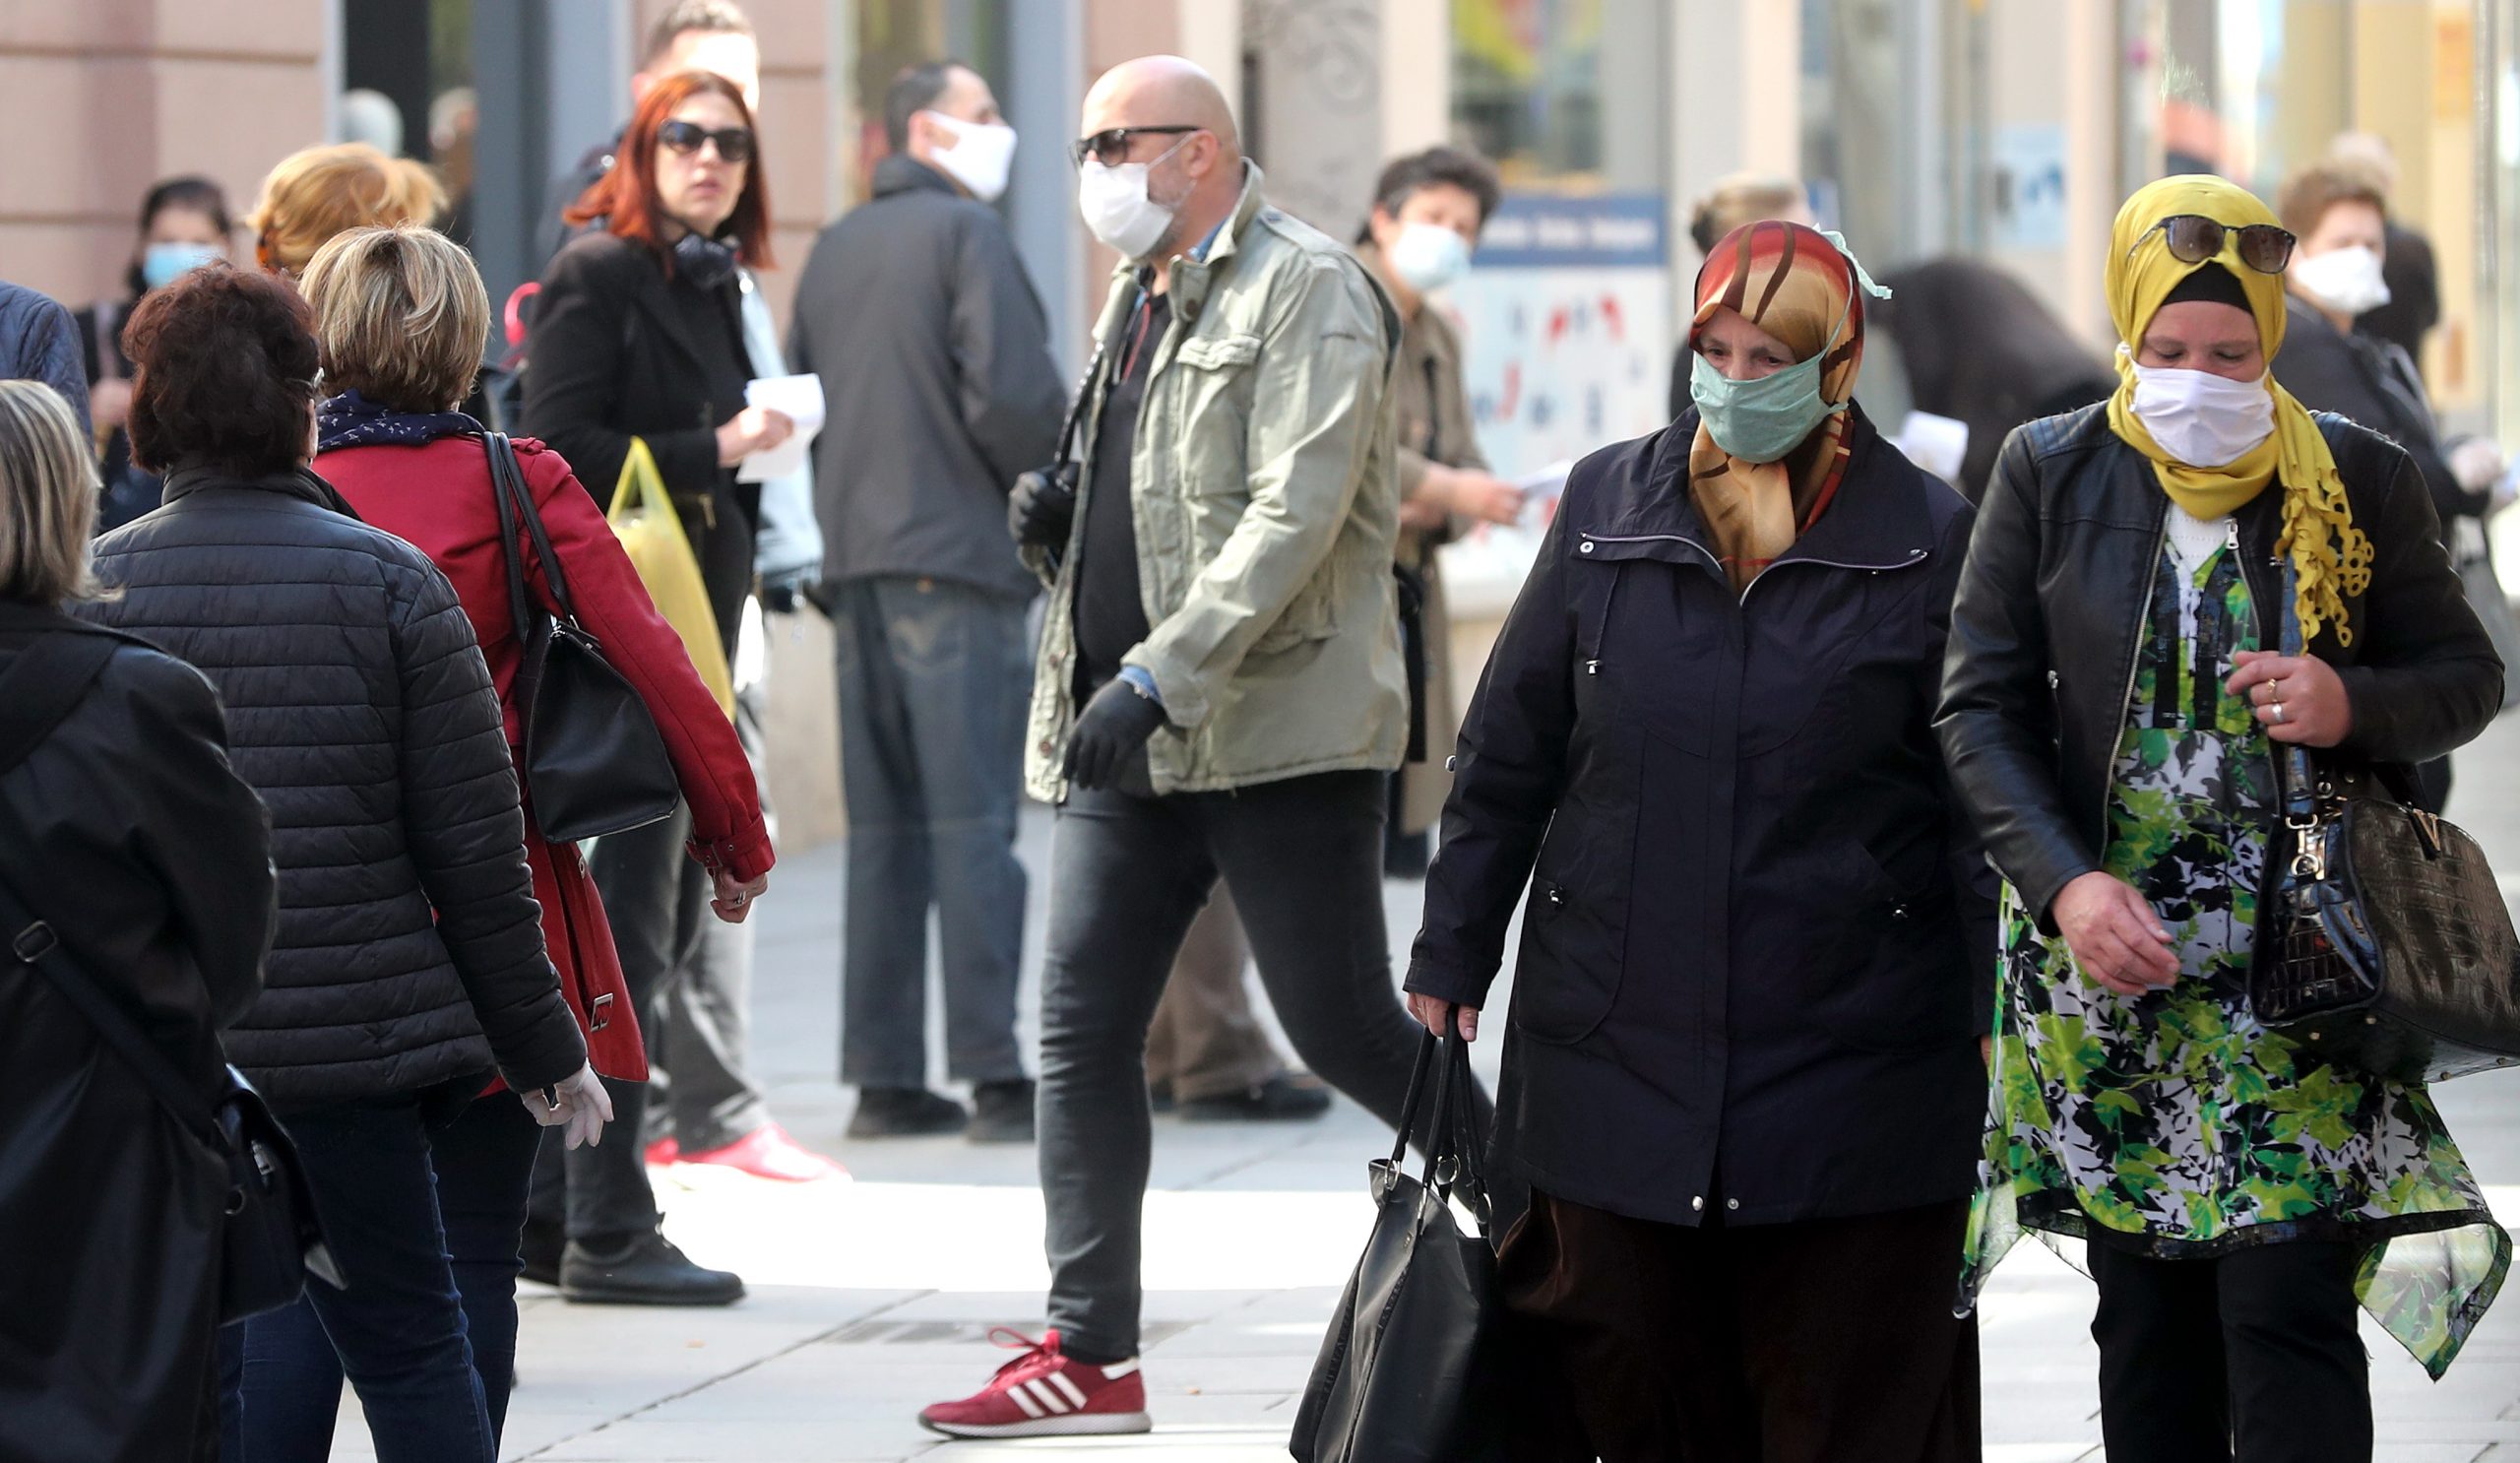 epa08366435 Bosnian people walk with face masks on a street following the outbreak of coronavirus, in Sarajevo, Bosnia and Herzegovina, 16 April 2020. Countries around the world are taking increased measures to stem the widespread of the SARS-CoV-2 coronavirus which causes the COVID-19 disease.  EPA/FEHIM DEMIR